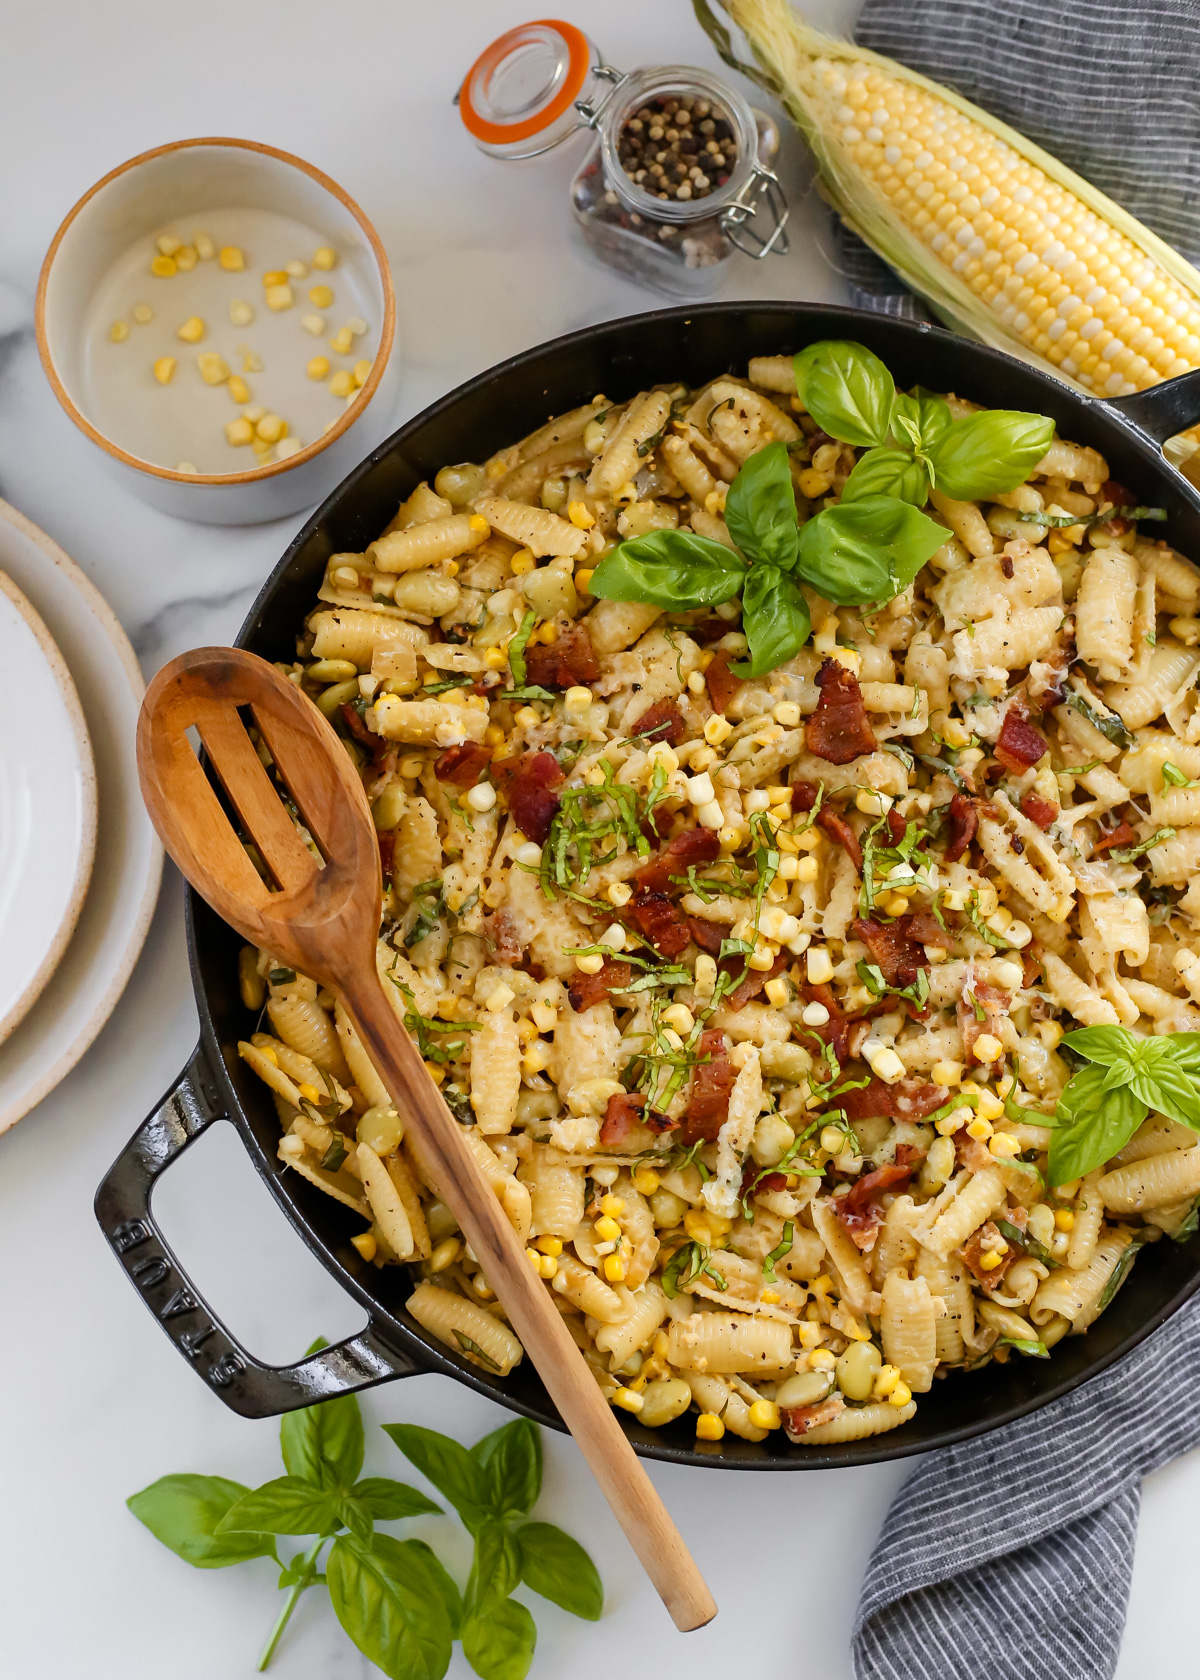 A large Staub braising dish contains a summer pasta recipe with corn and a creamy sauce, plus bacon, sweet corn kernels, fresh basil, butter beans, and mozzarella cheese. The pan is garnished with sprigs of fresh basil leaves and a wooden serving spoon rests on the side